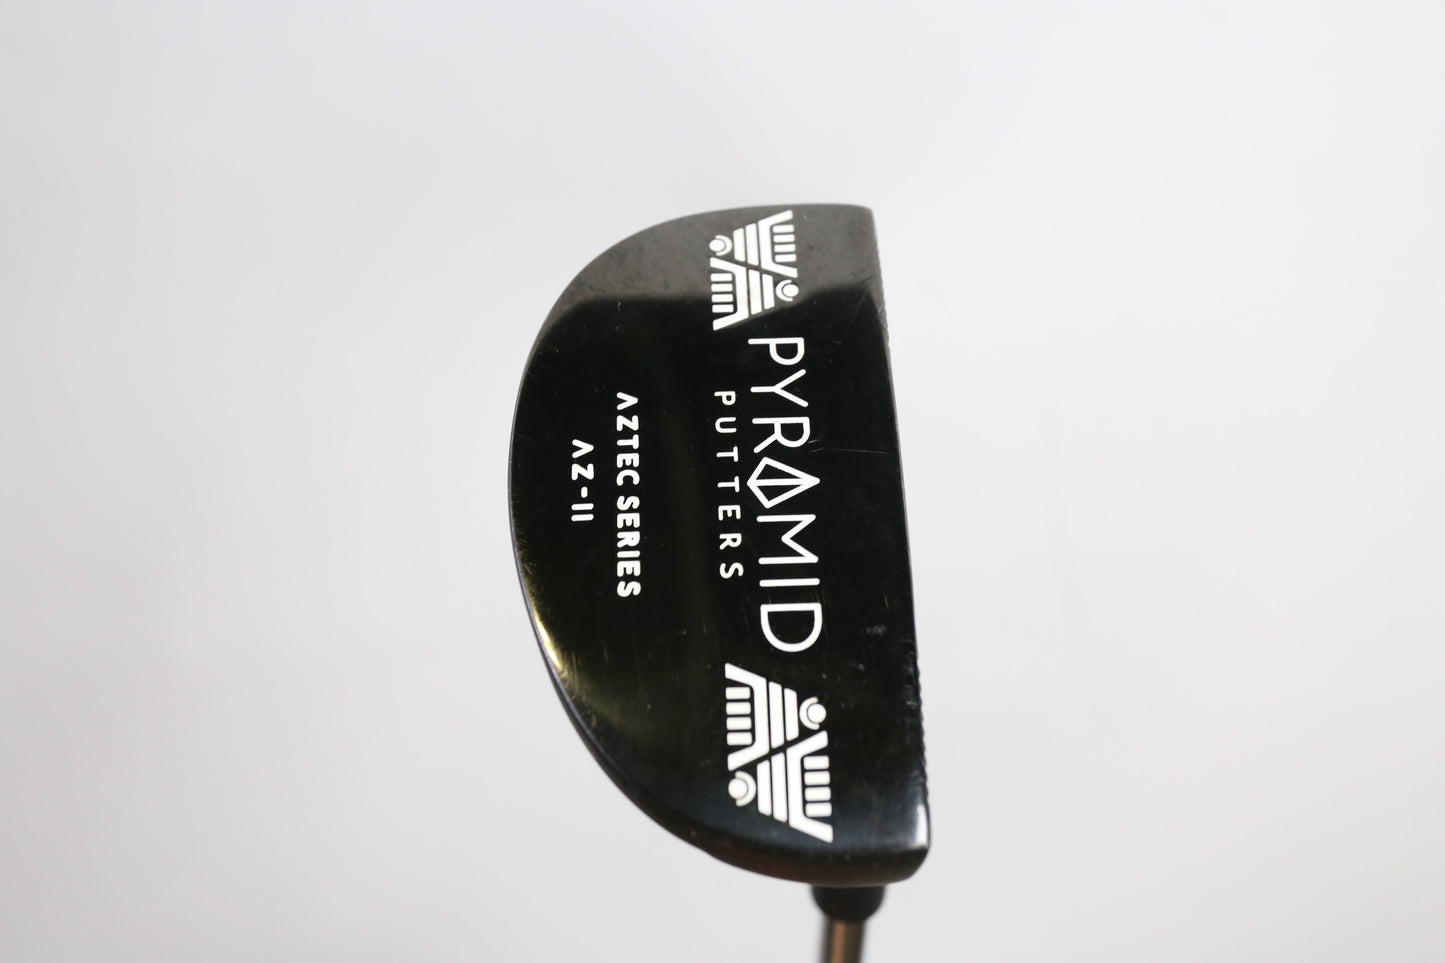 Used Pyramid Putters AZ-11 Putter - Right-Handed - 34 in - Mallet